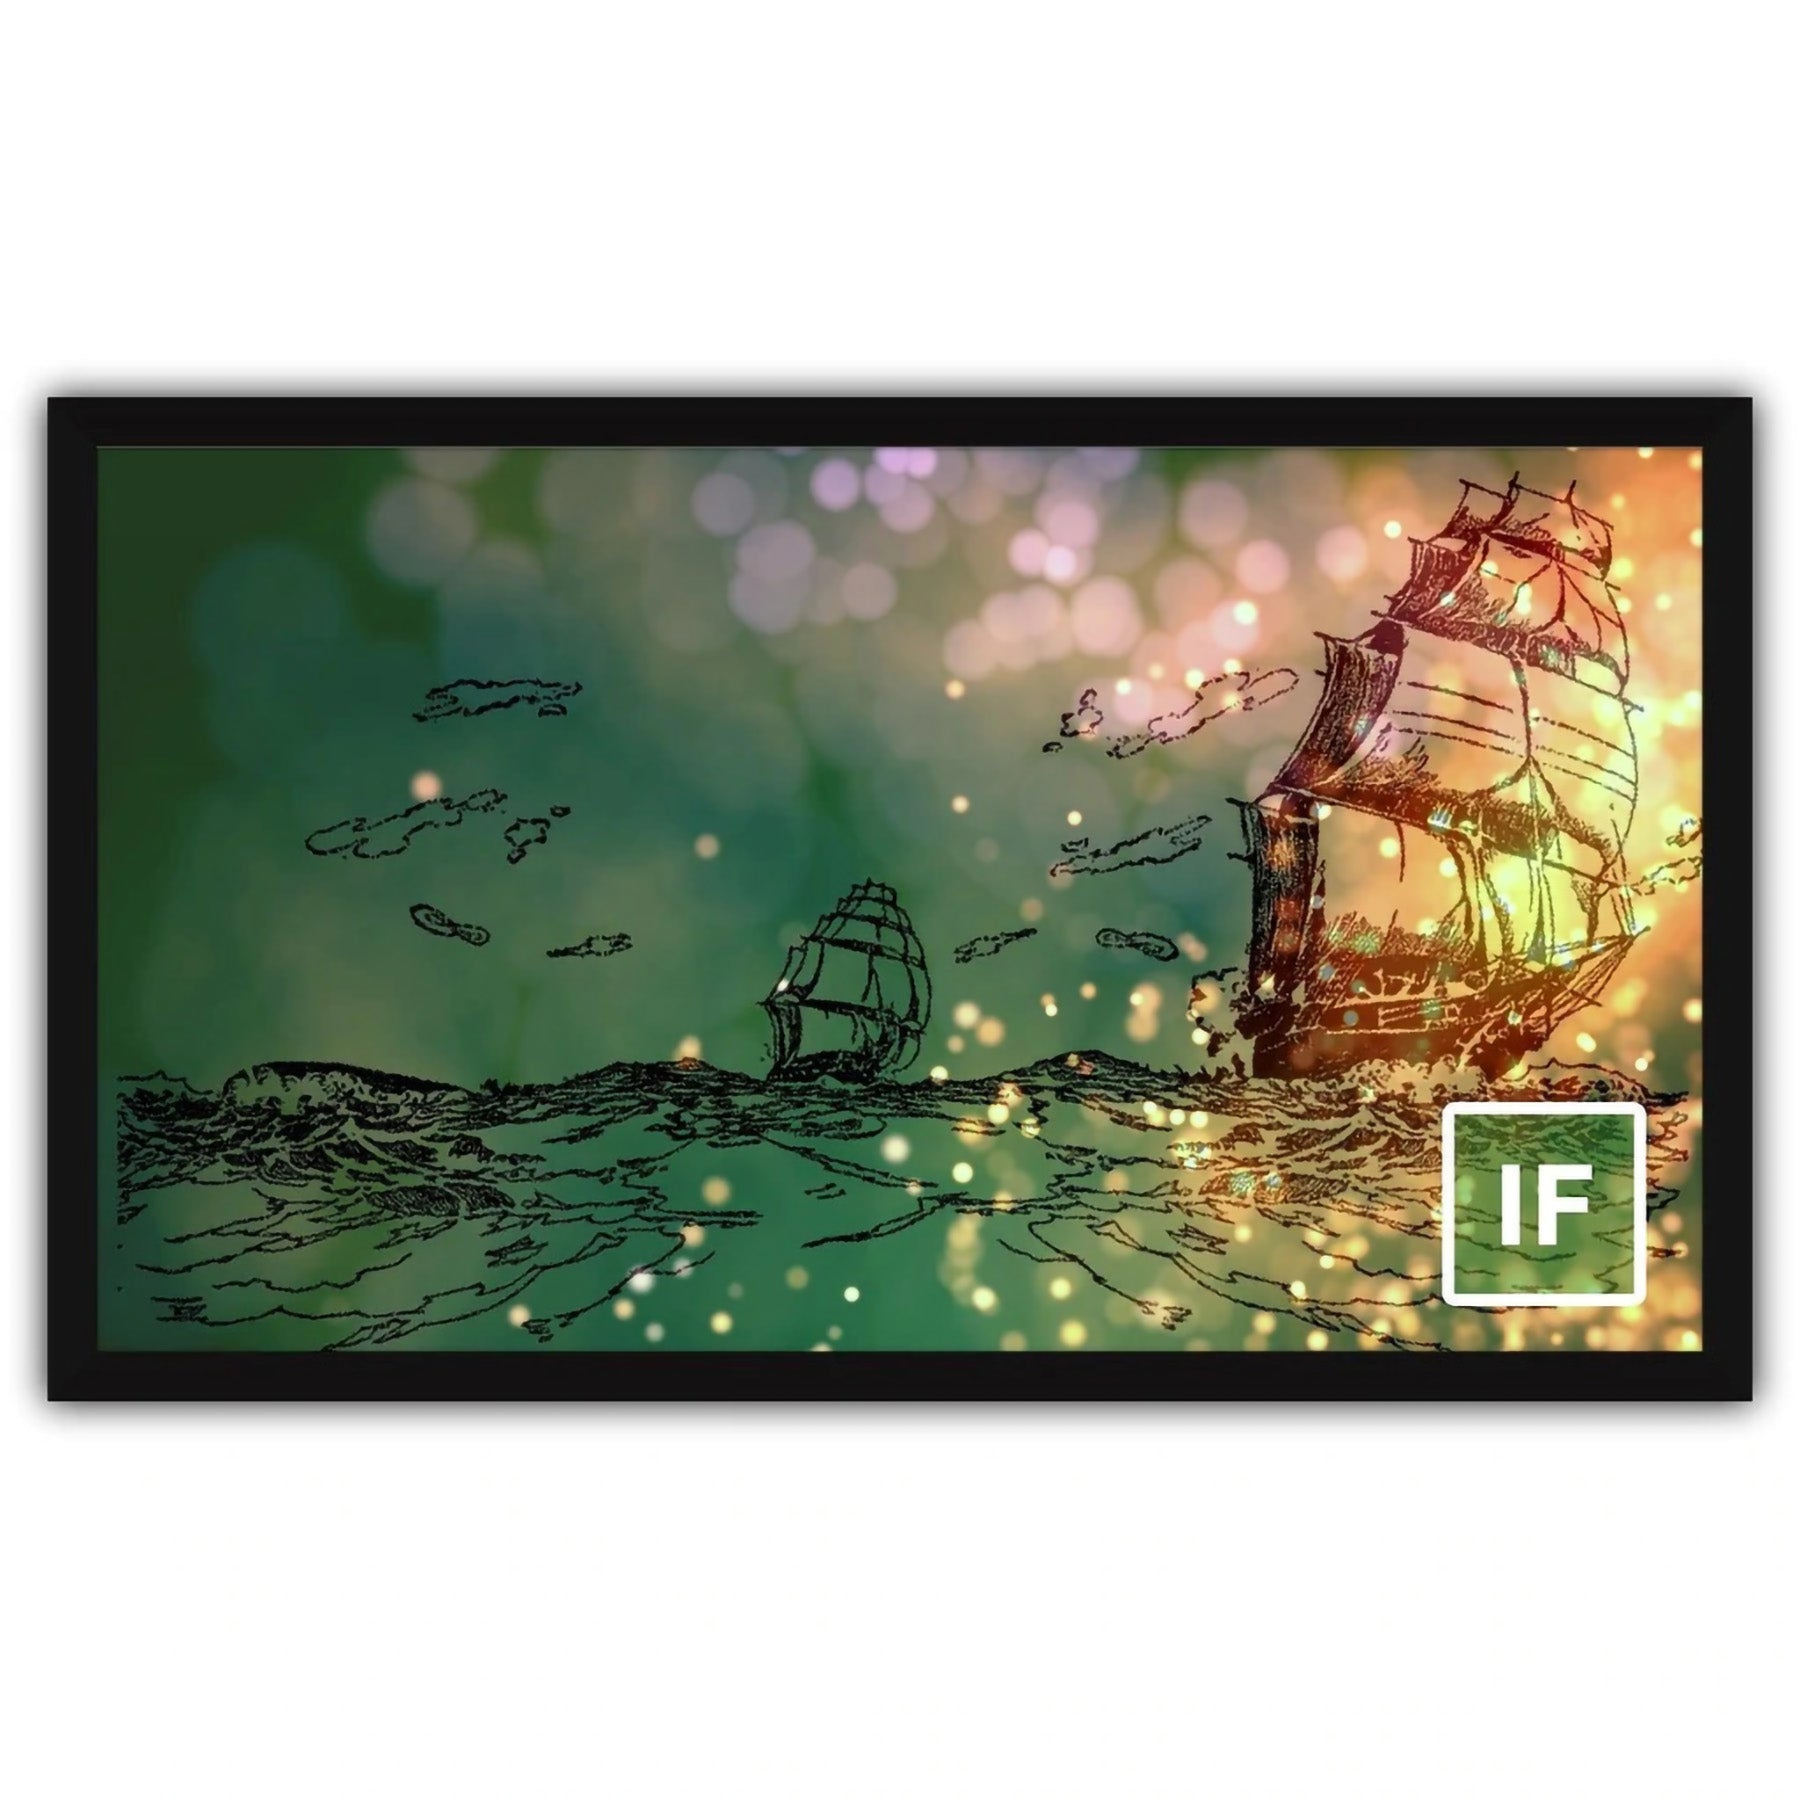 Severtson Screens Impression Series 16:9 72-inch Fixed Frame Projection Screen